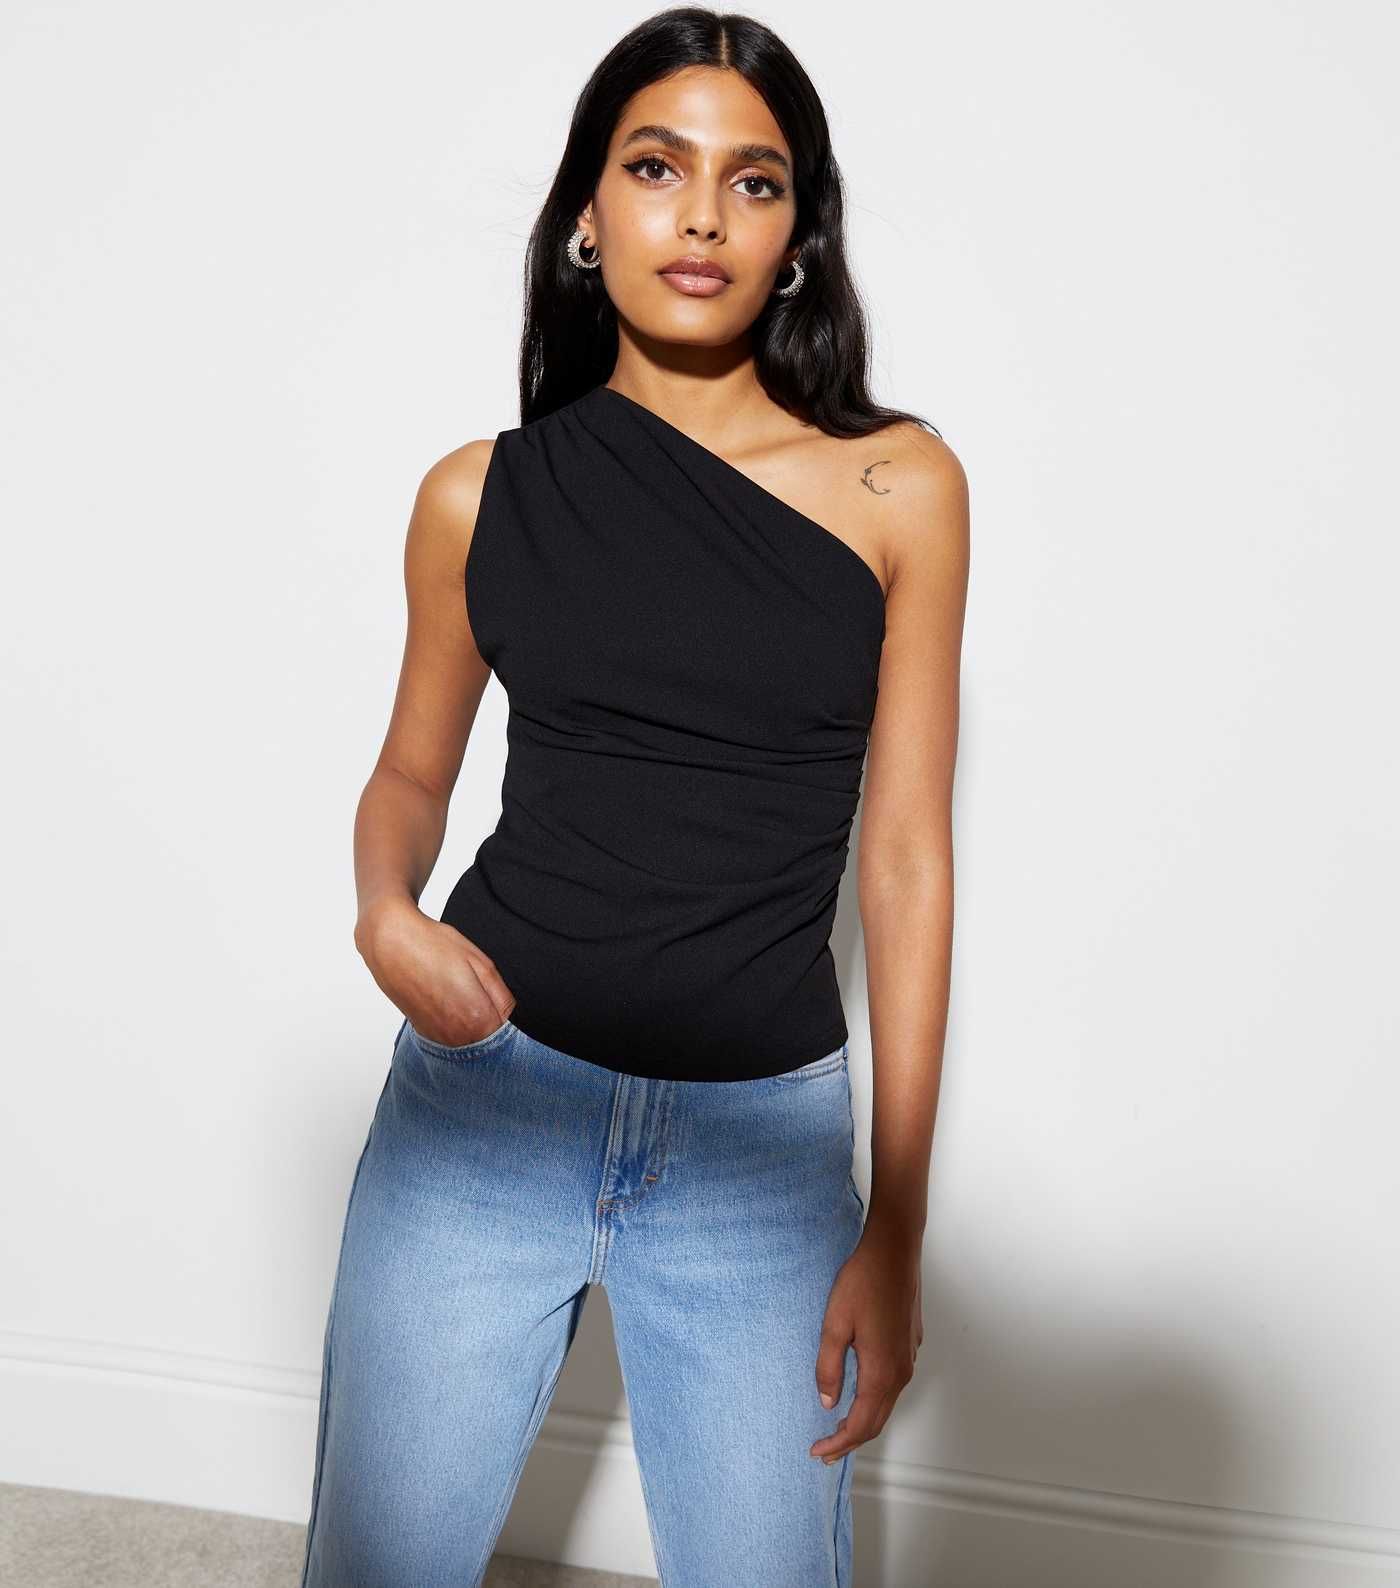 Black One Shoulder Top
						
						Add to Saved Items
						Remove from Saved Items | New Look (UK)